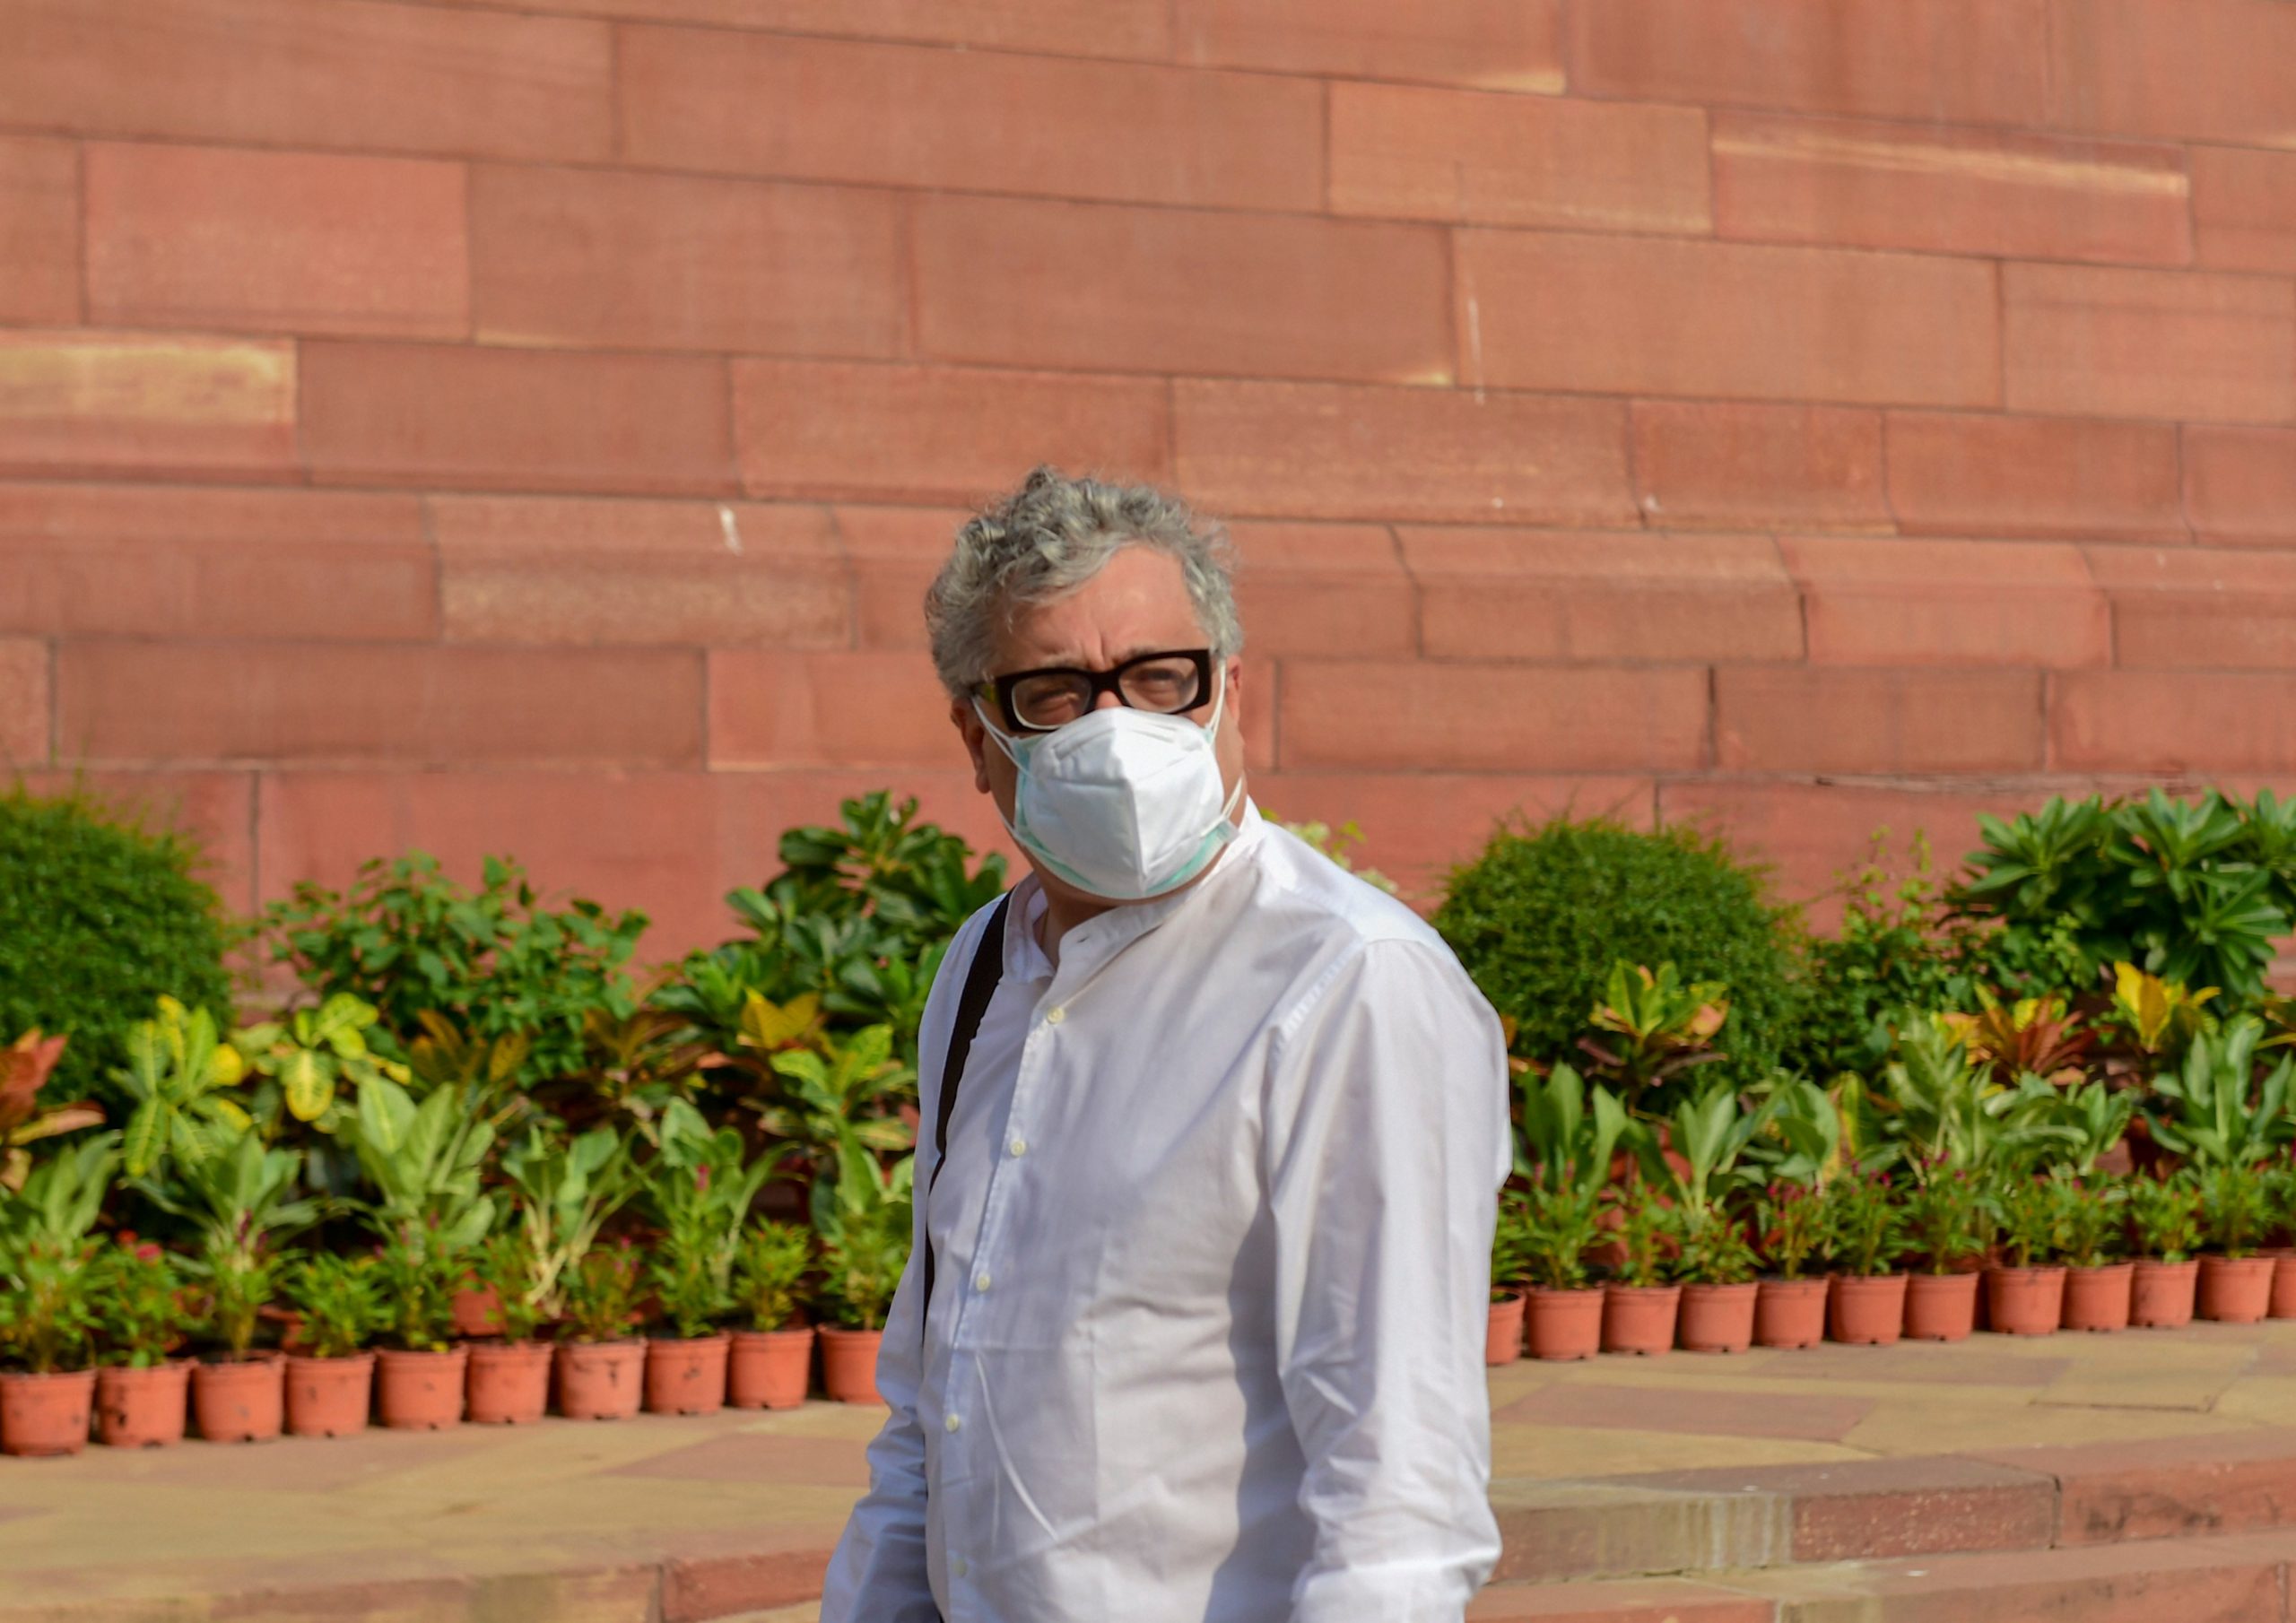 ‘PM Couldn’t-Care-Less Fund’: Derek O’Brien lashes out at Centre for ‘mishandling coronavirus’